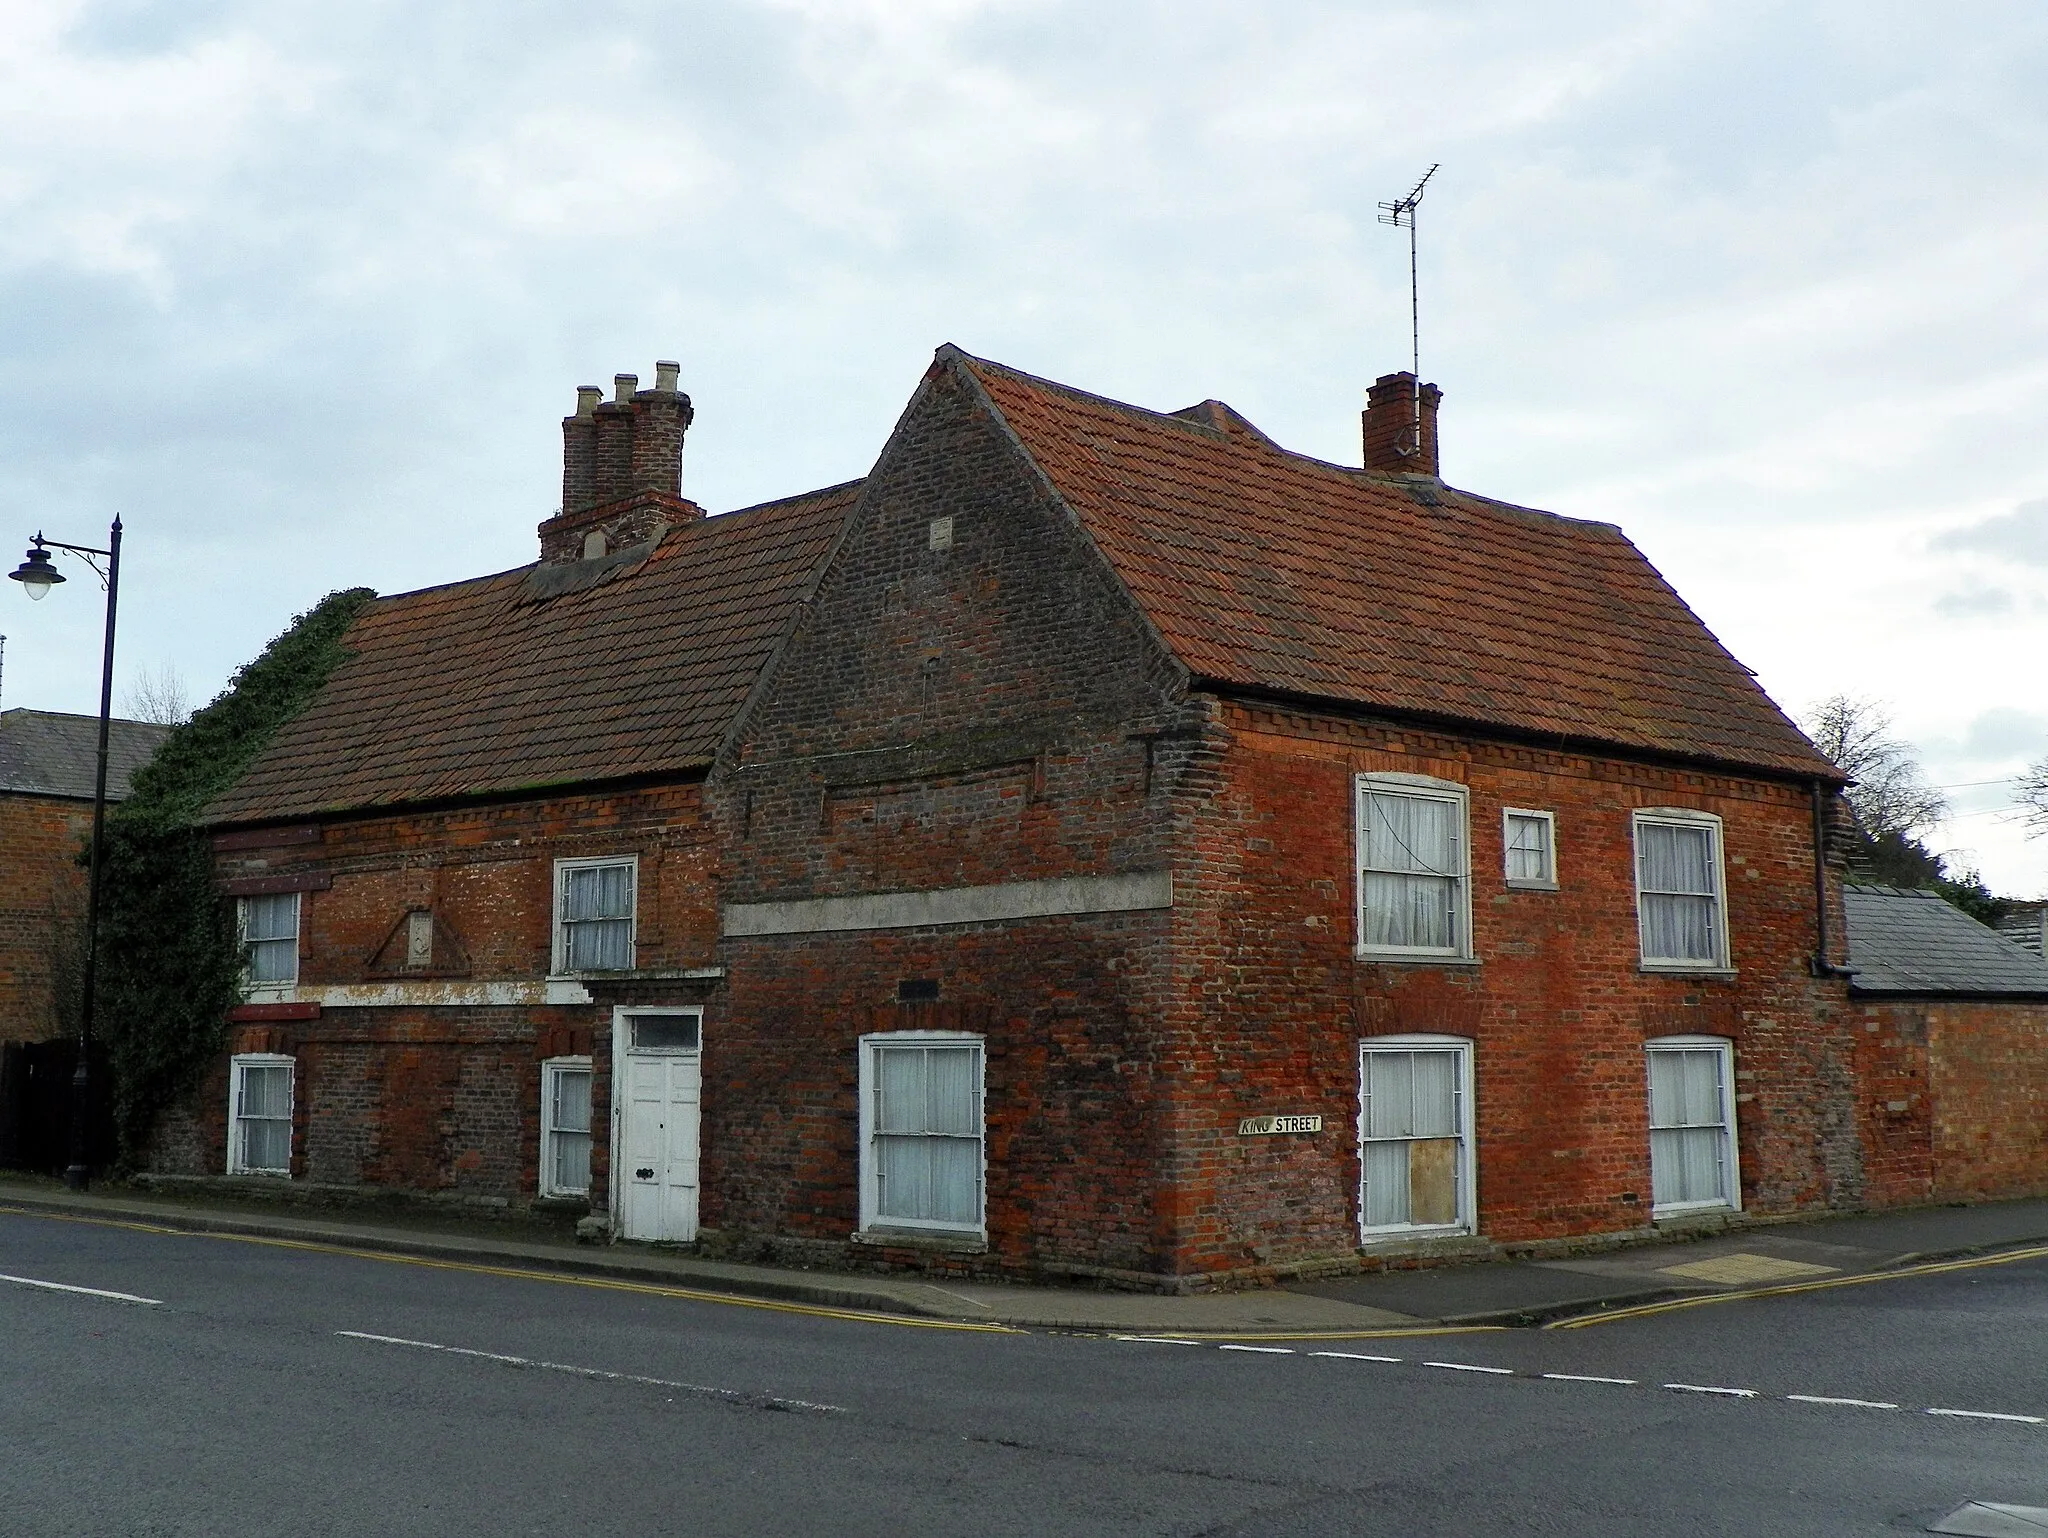 Photo showing: The Old King's Head (former pub), Kirton, Lincolnshire (Grade II). 26 December 2015.

To see my collections, go here.